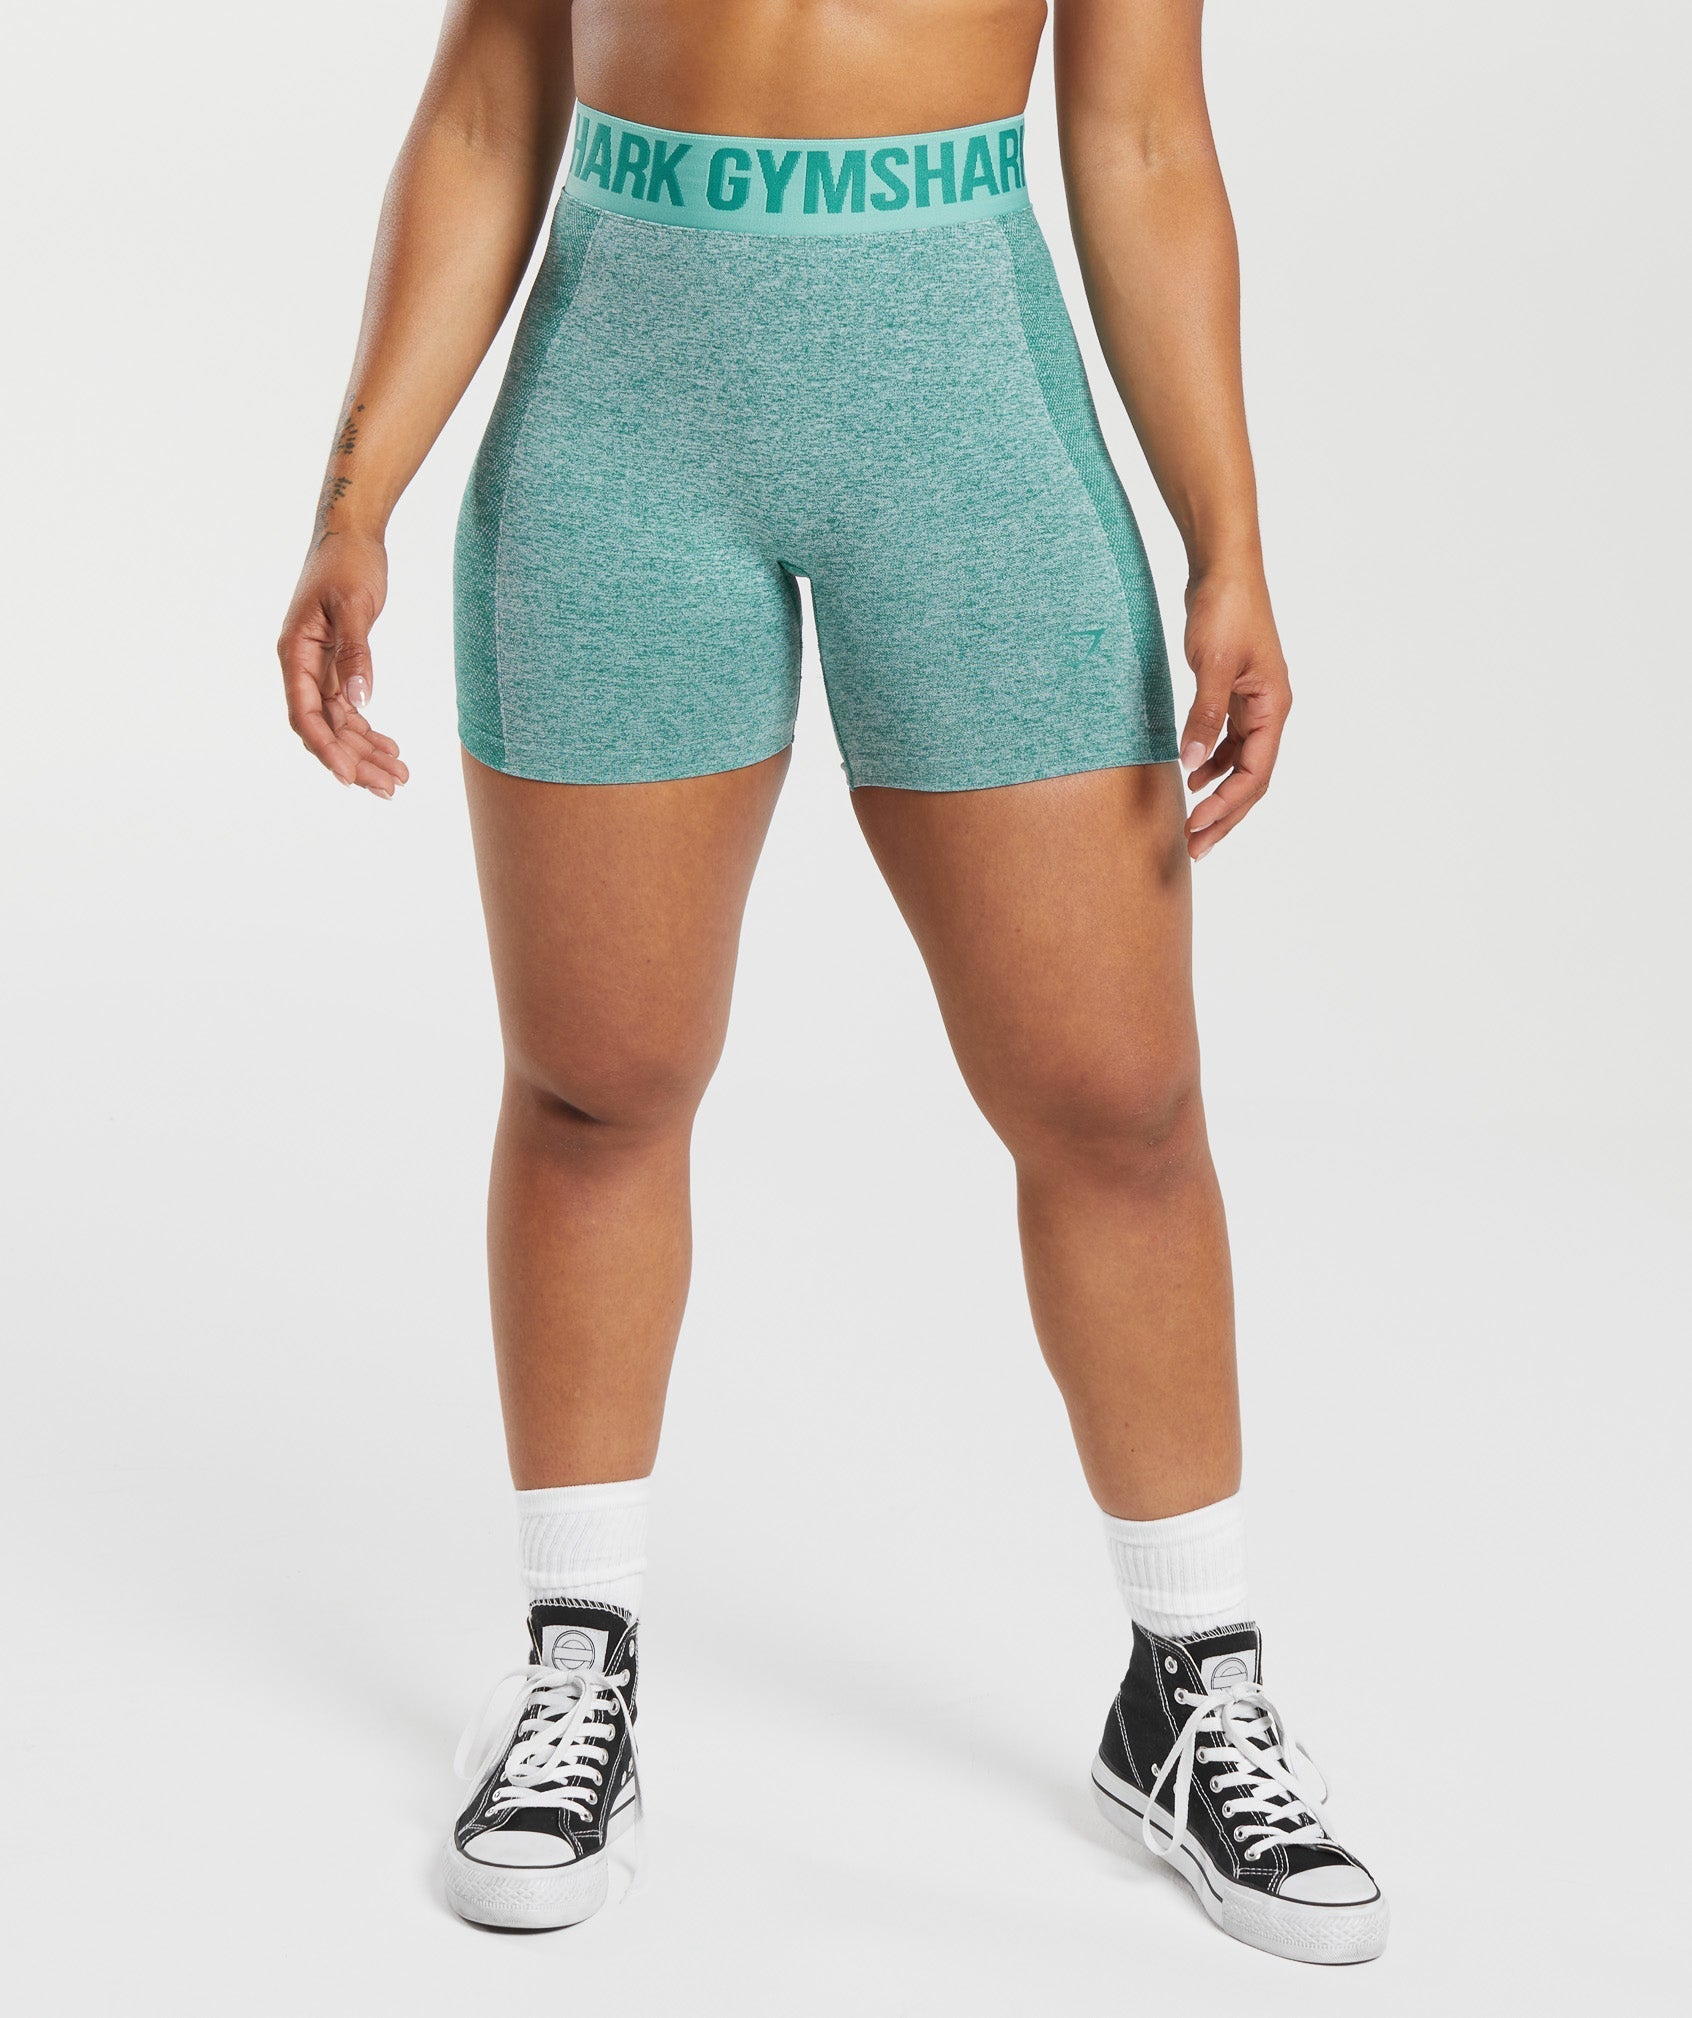 Women's Gymshark Recess Track training trousers cactus green 